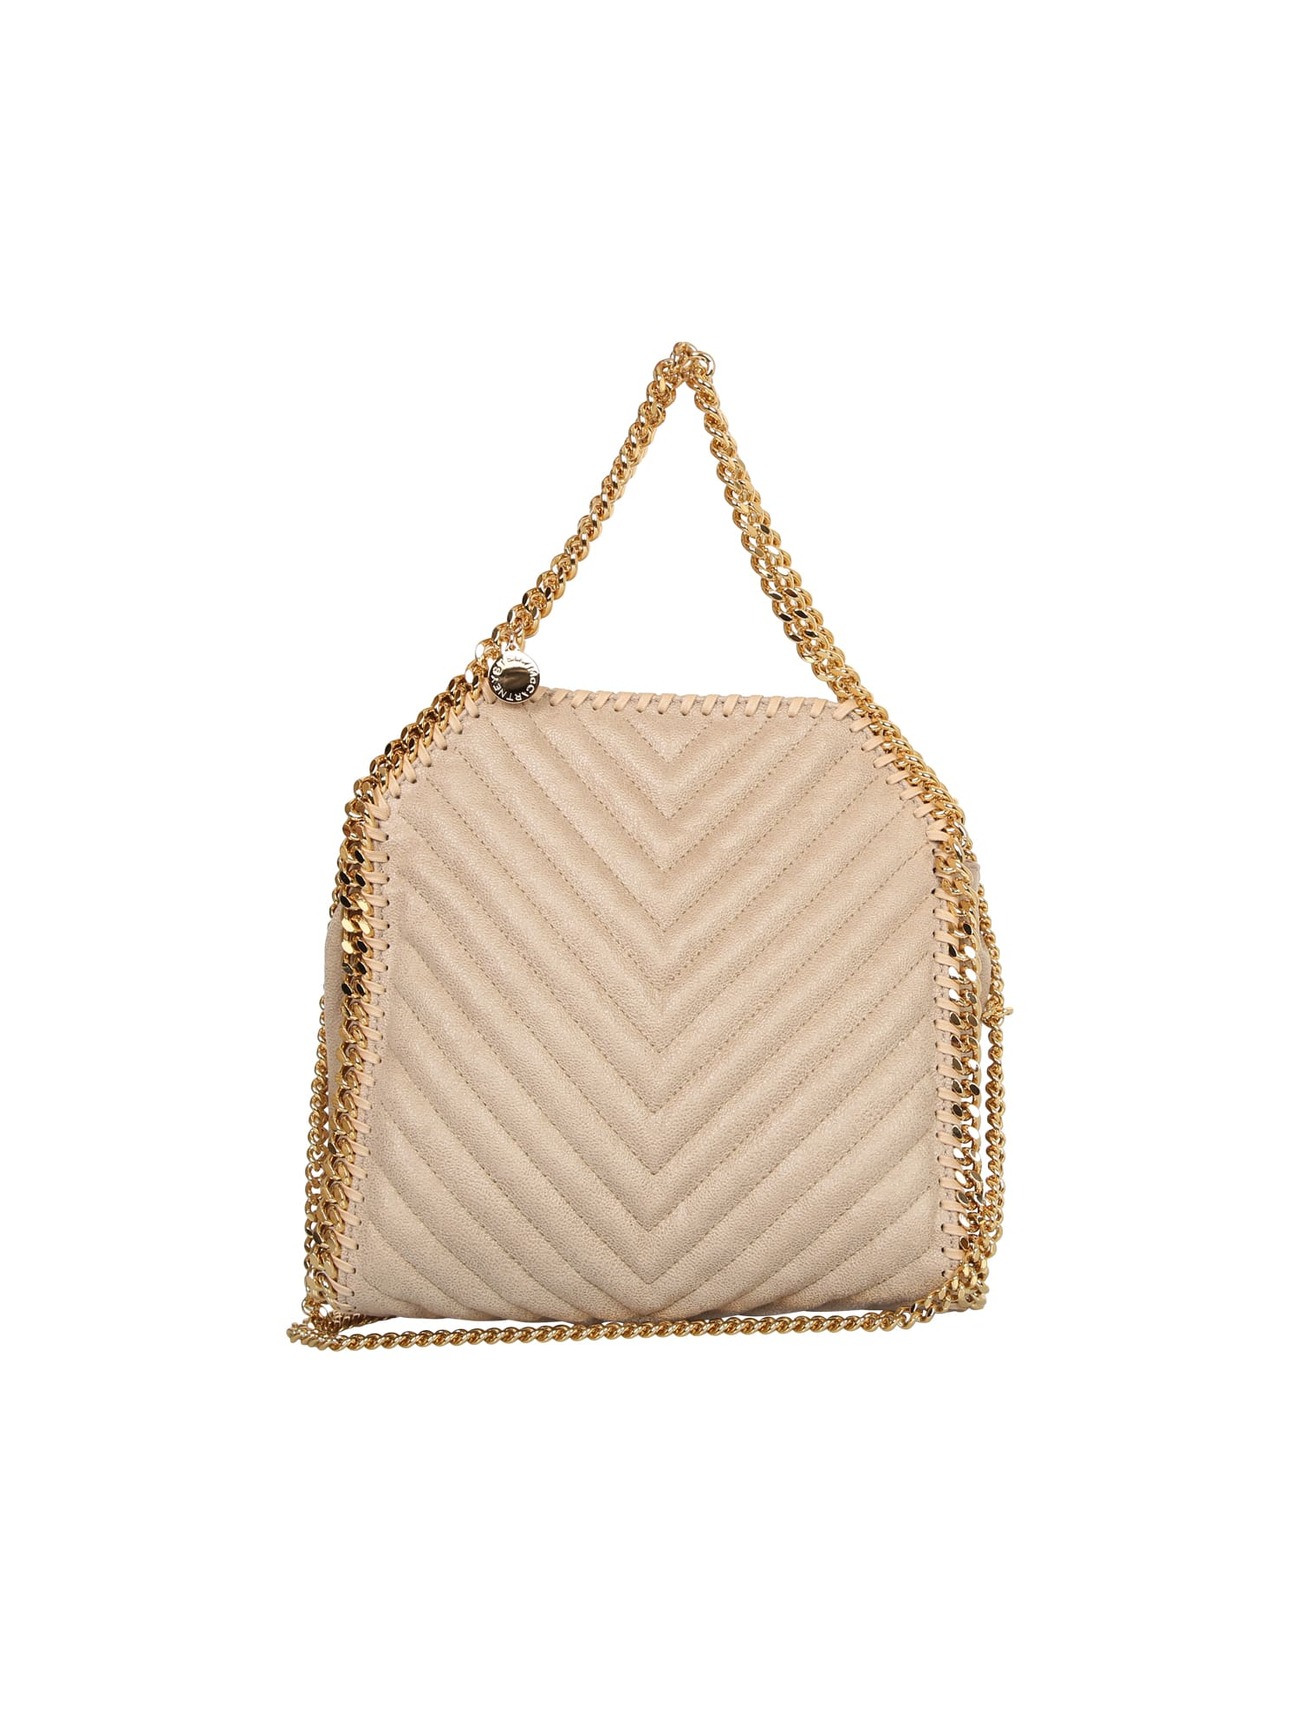 Stella McCartney Falabella Quilted Tote Bag in beige